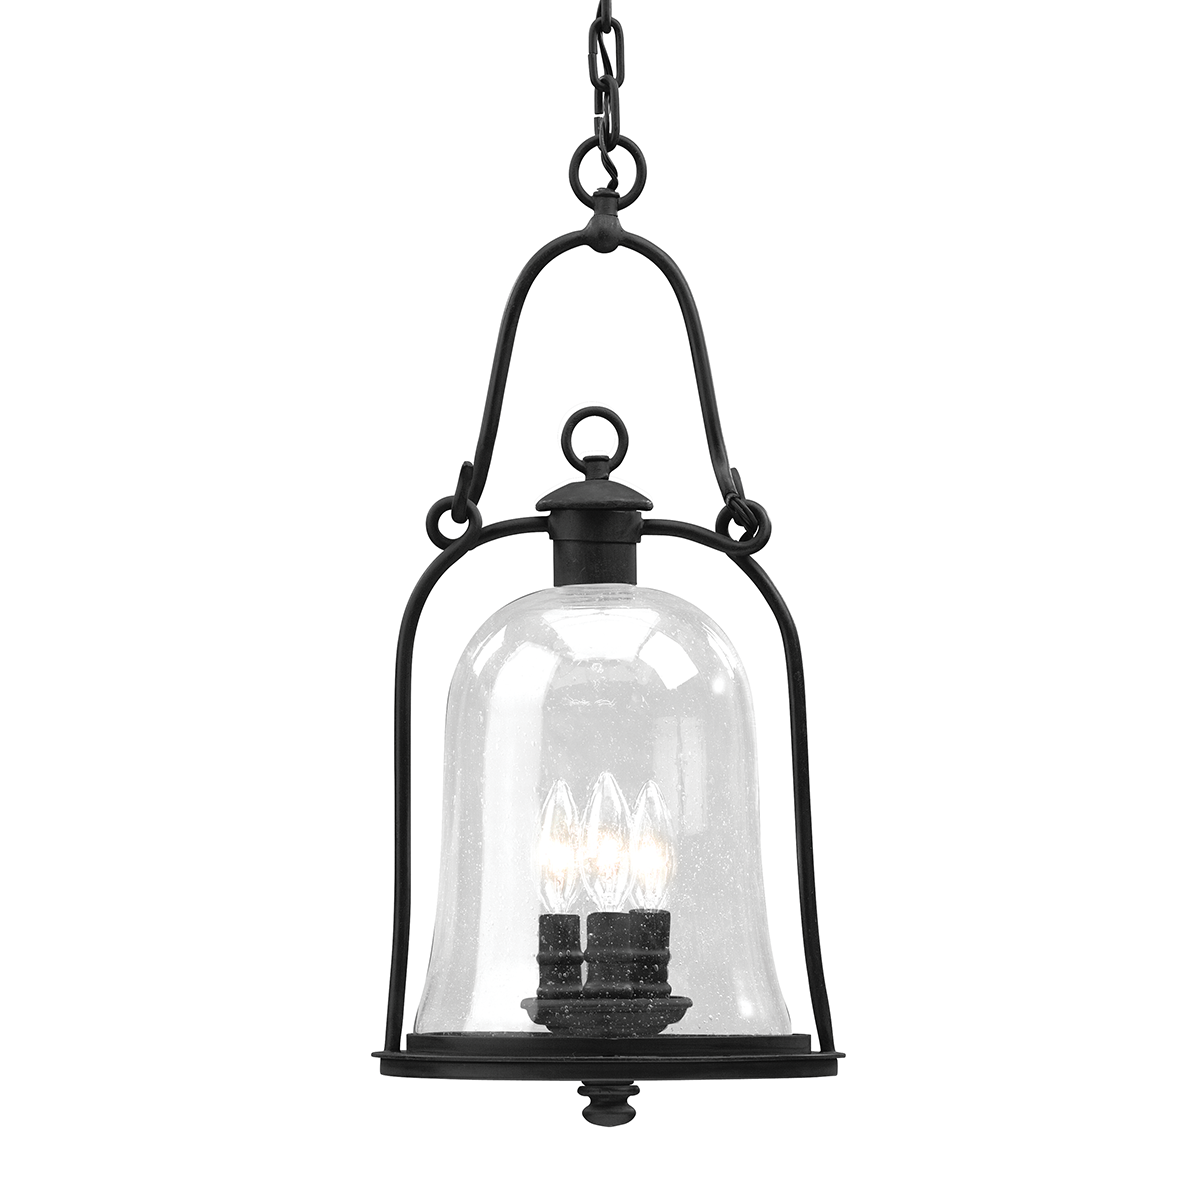 Troy Lighting OWINGS MILL 3LT HANGING LANTERN LARGE F9467 Outdoor Light Fixture l Hanging Troy Lighting NATURAL BRONZE  